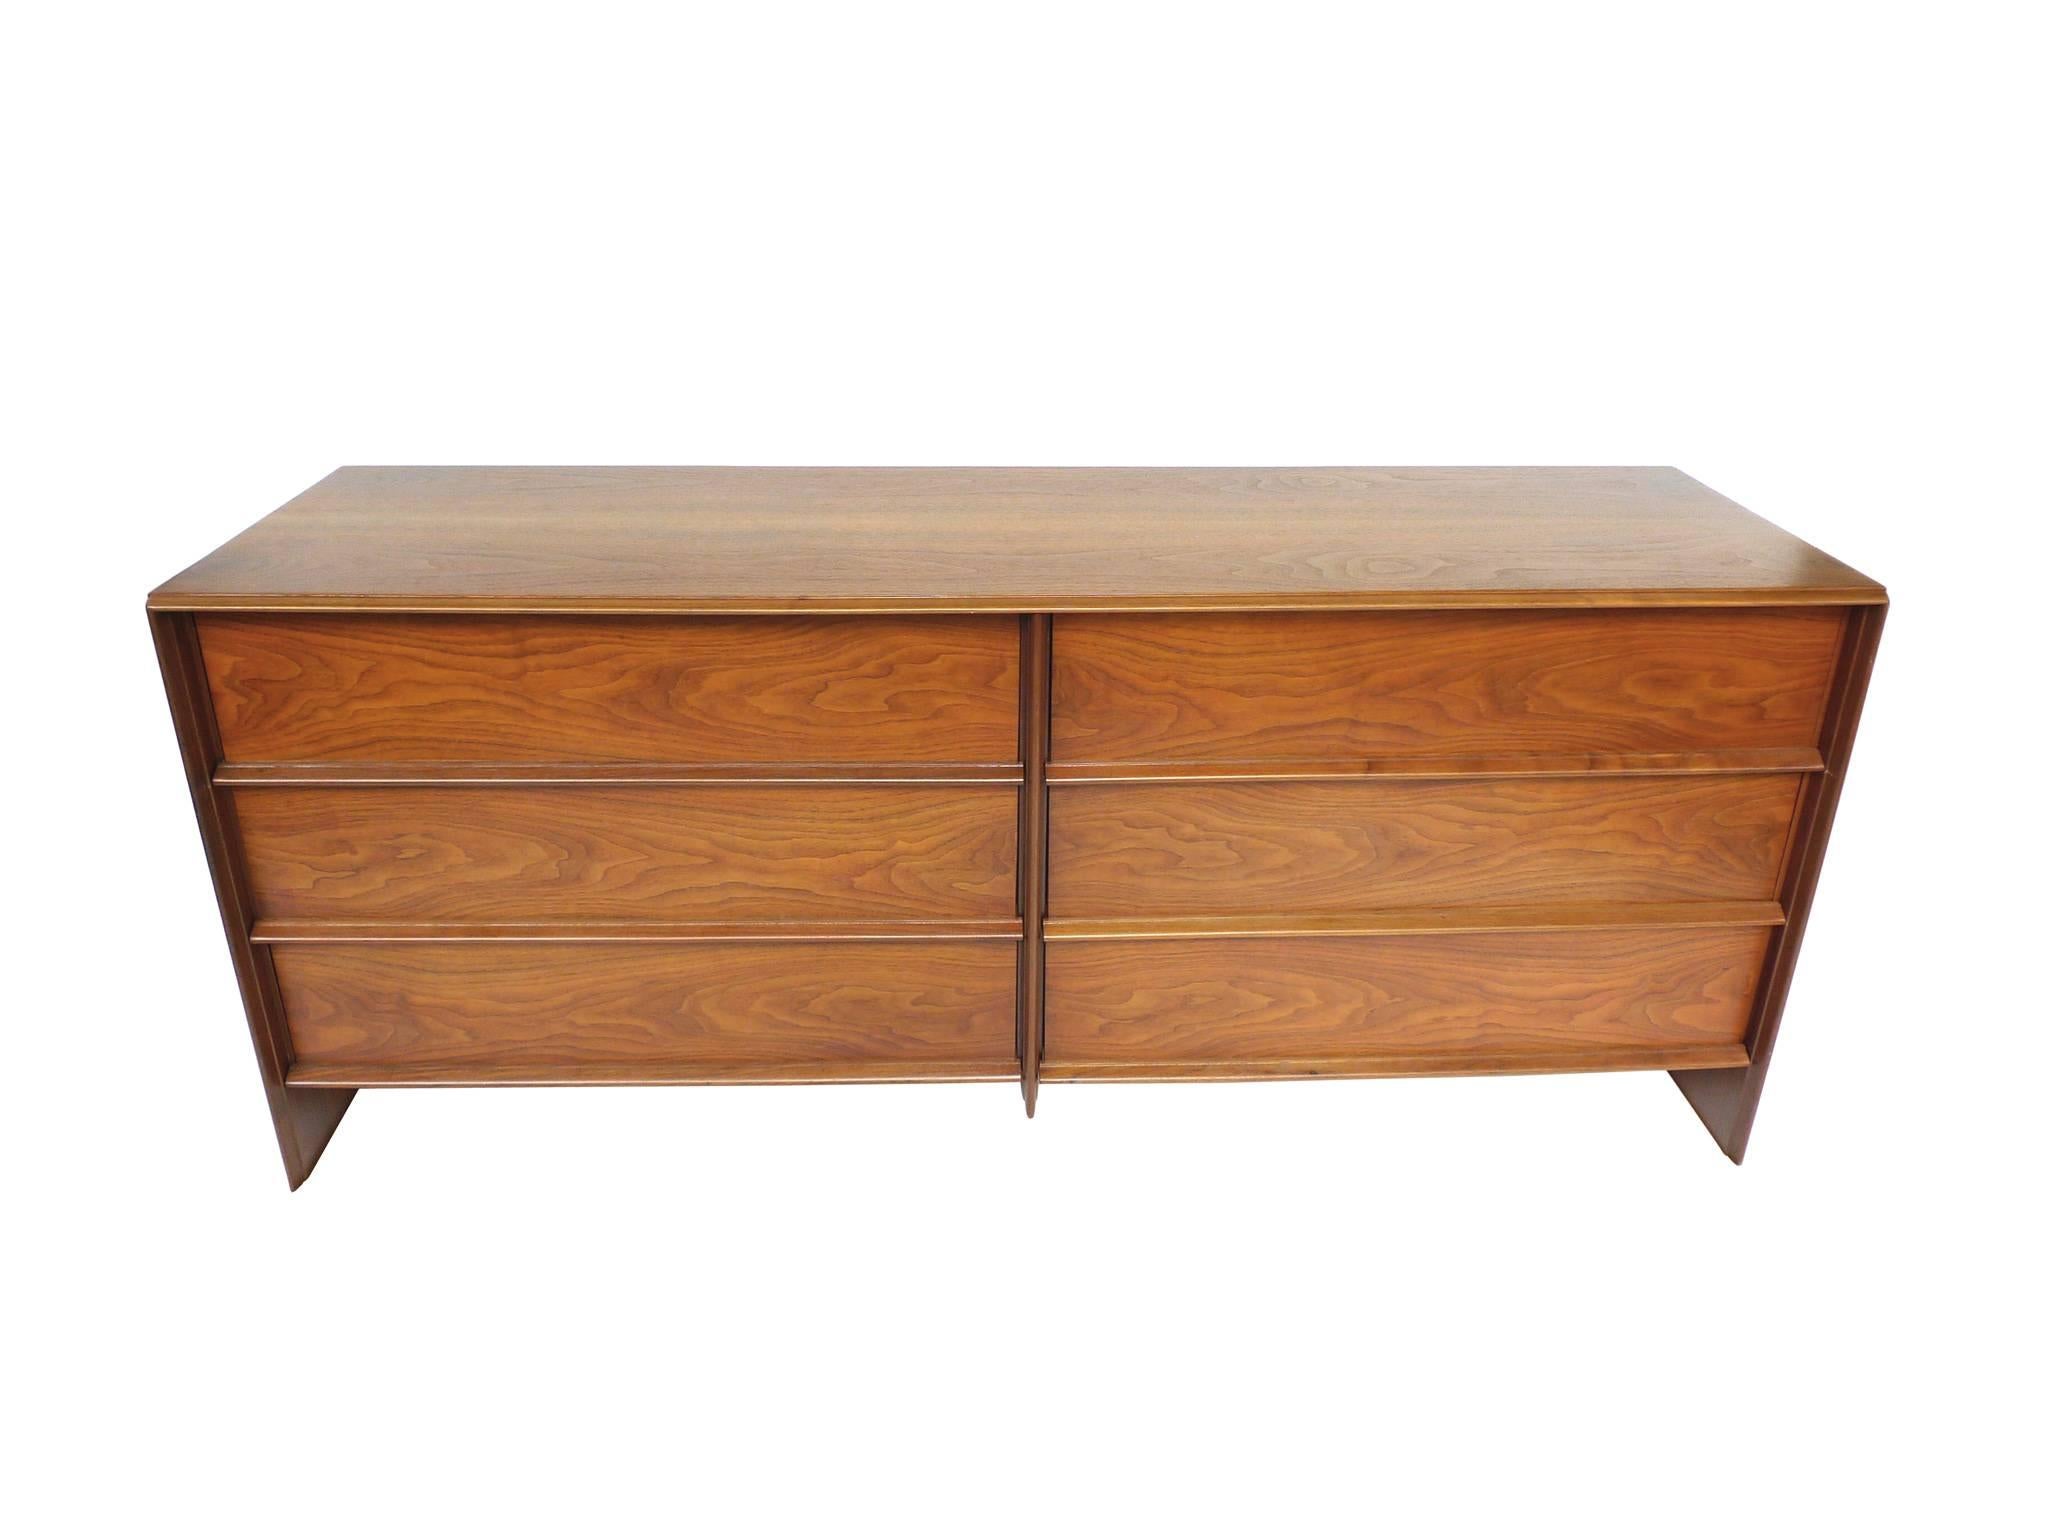 This newly refinished mahogany dresser was designed by Robsjohn-Gibbings and manufactured by Widdicomb. It is exquisite craftsmanship, exemplifying the designer's inclination for balance and simplicity. The dresser has six drawers. In the top two